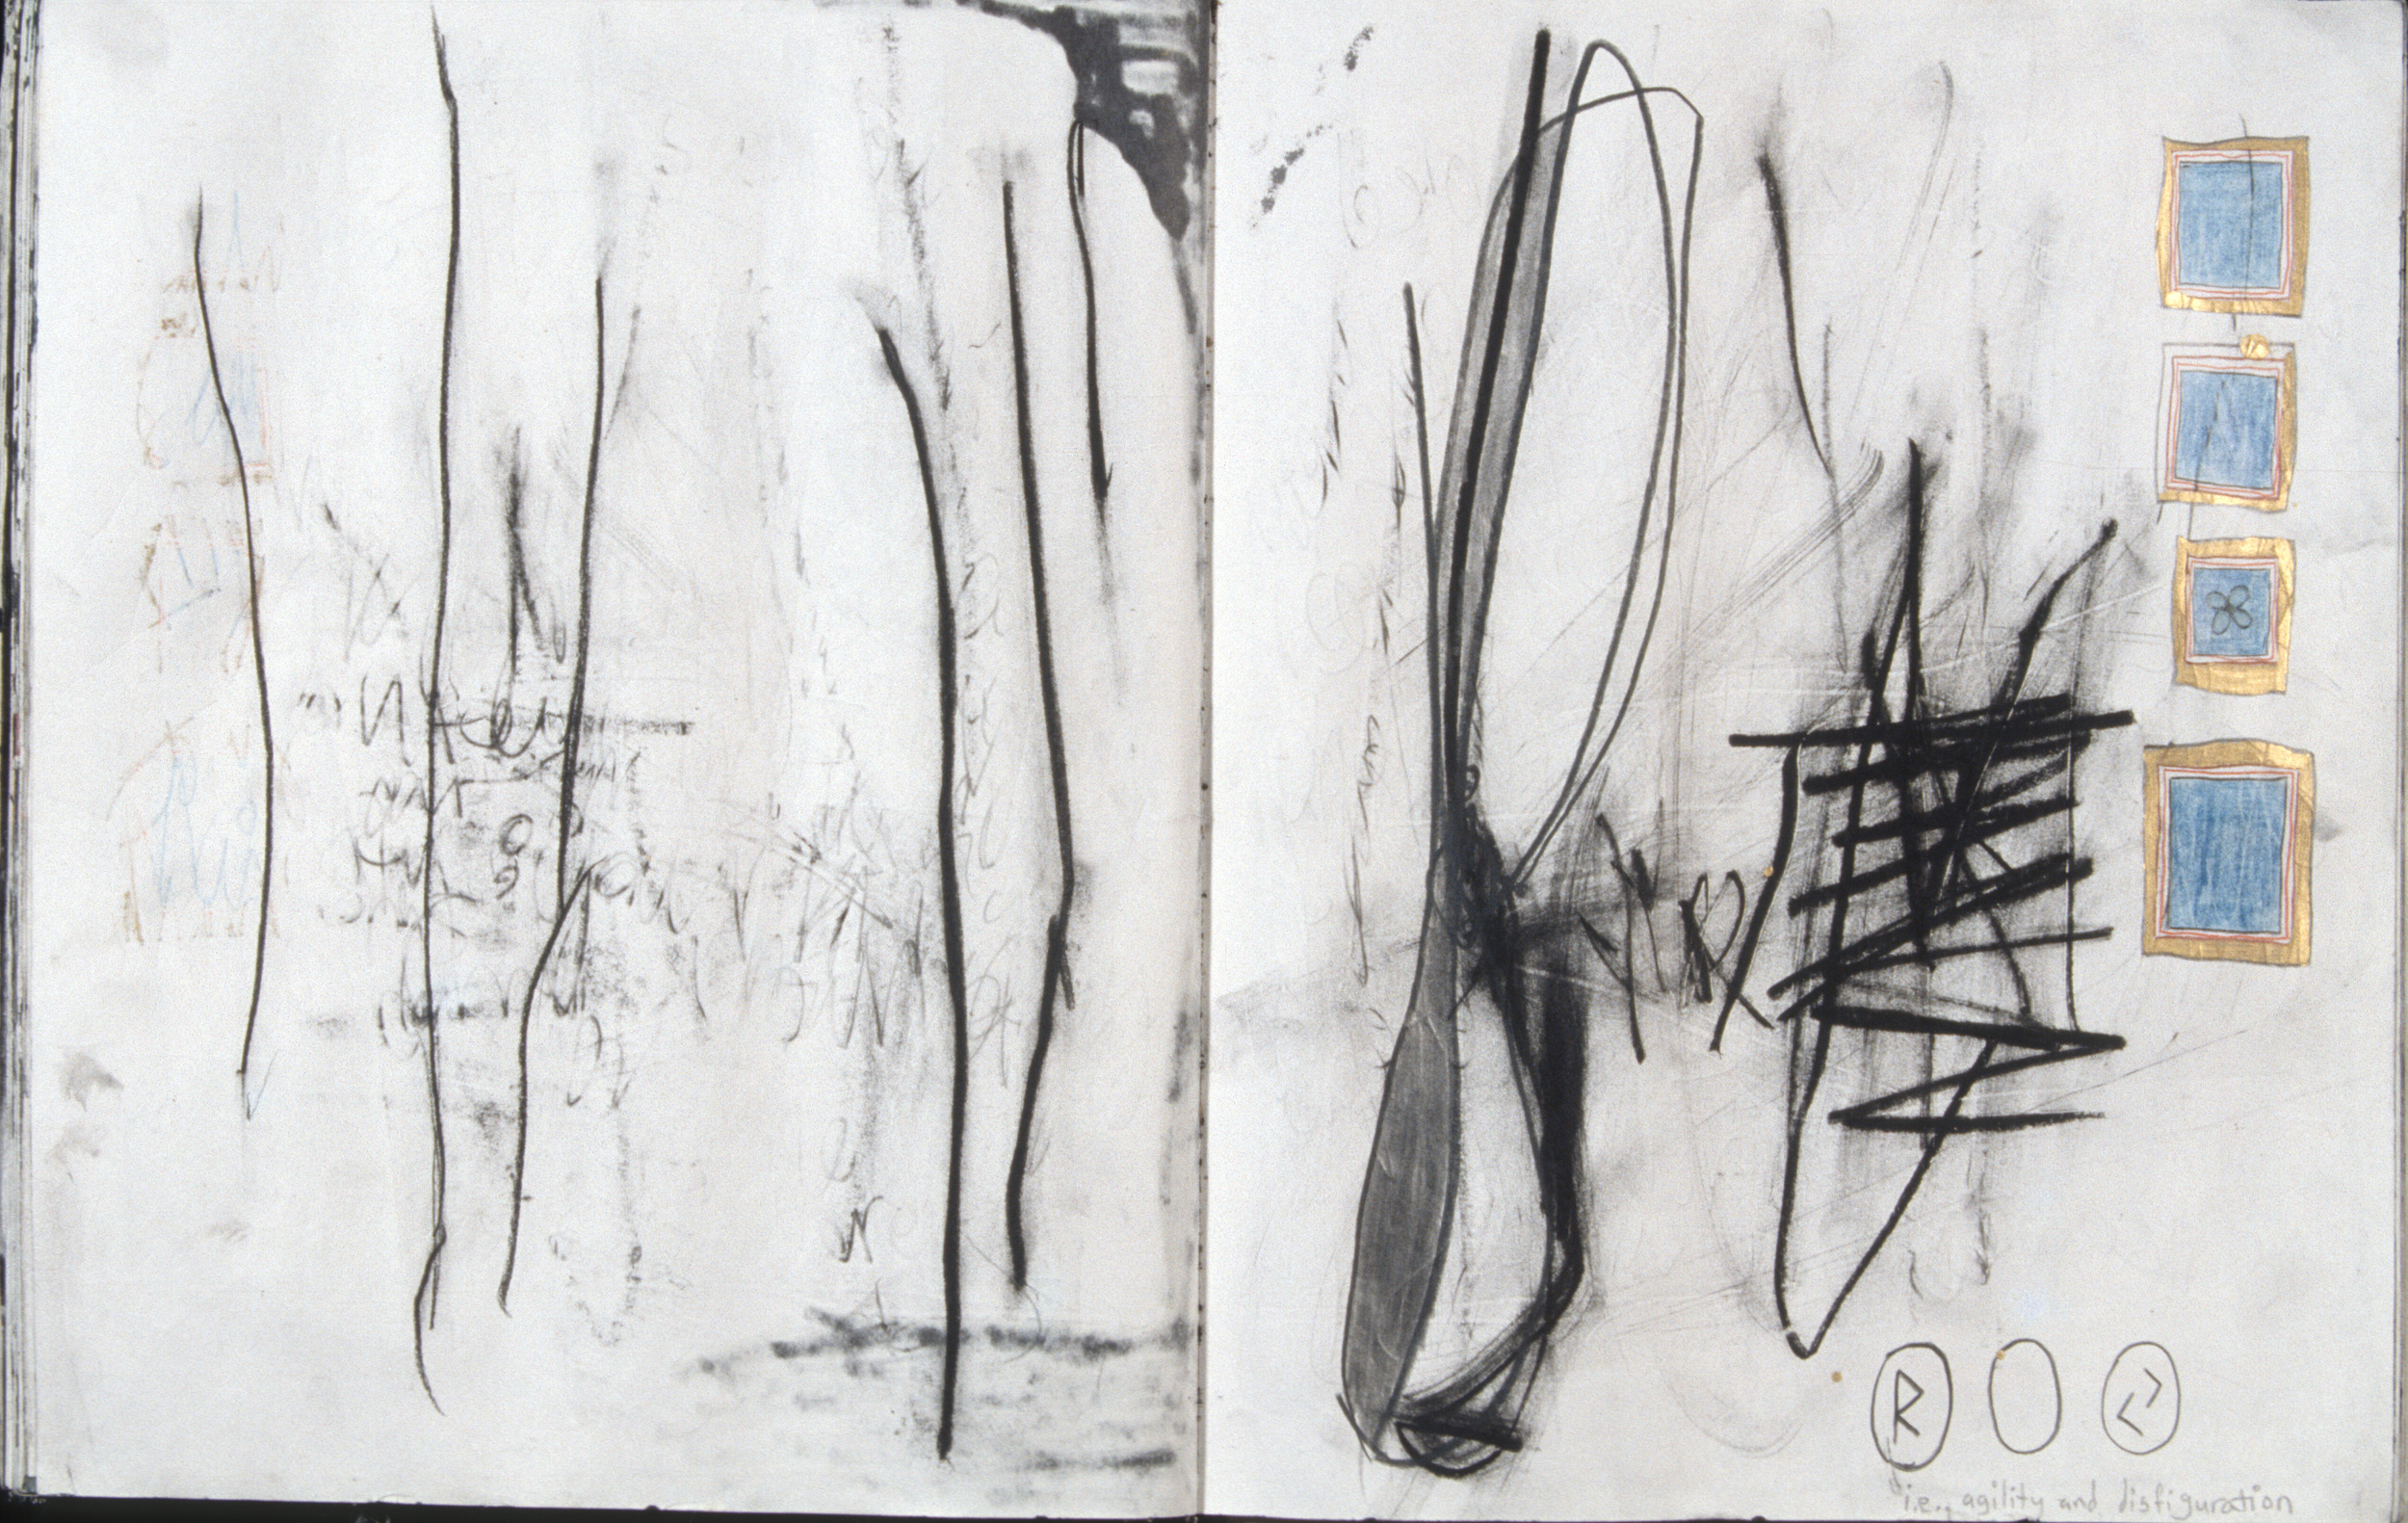 Stolen Sketchbook (Agility and Disfiguration)